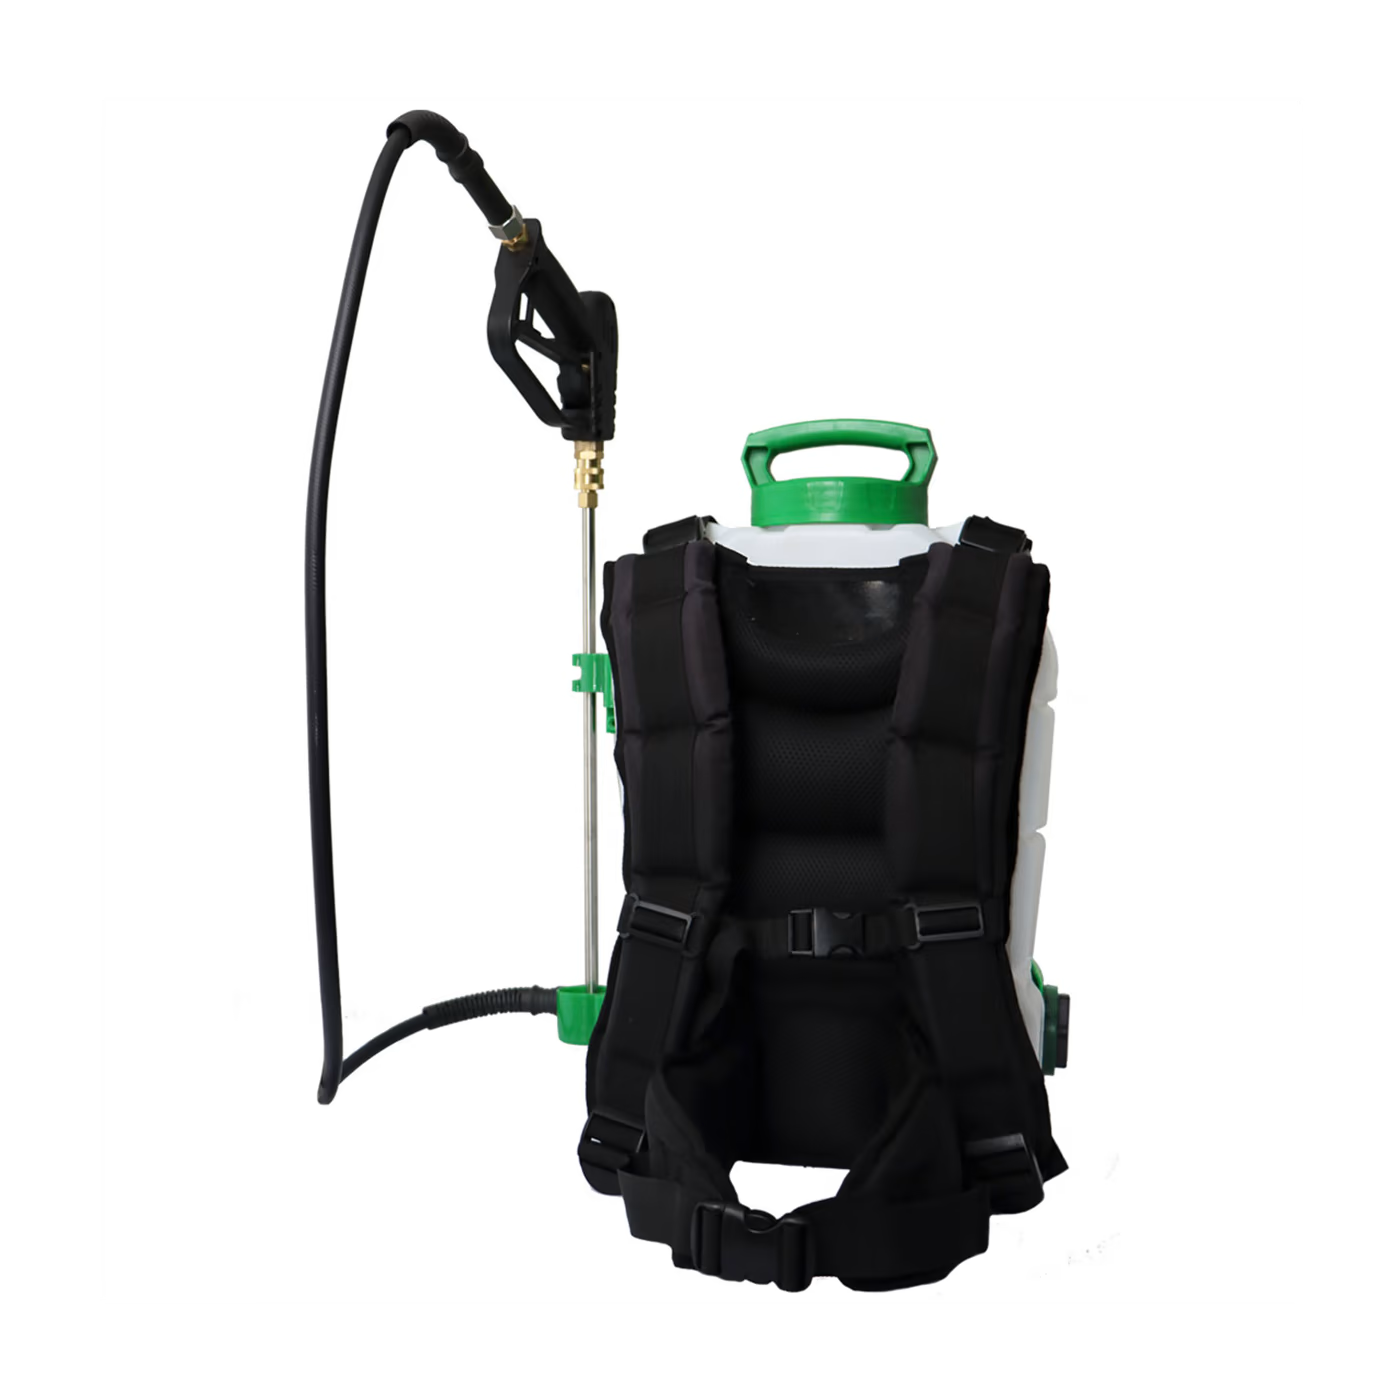 FlowZone Cyclone 3 | 5-Position Battery Backpack Sprayer (4-Gallon)